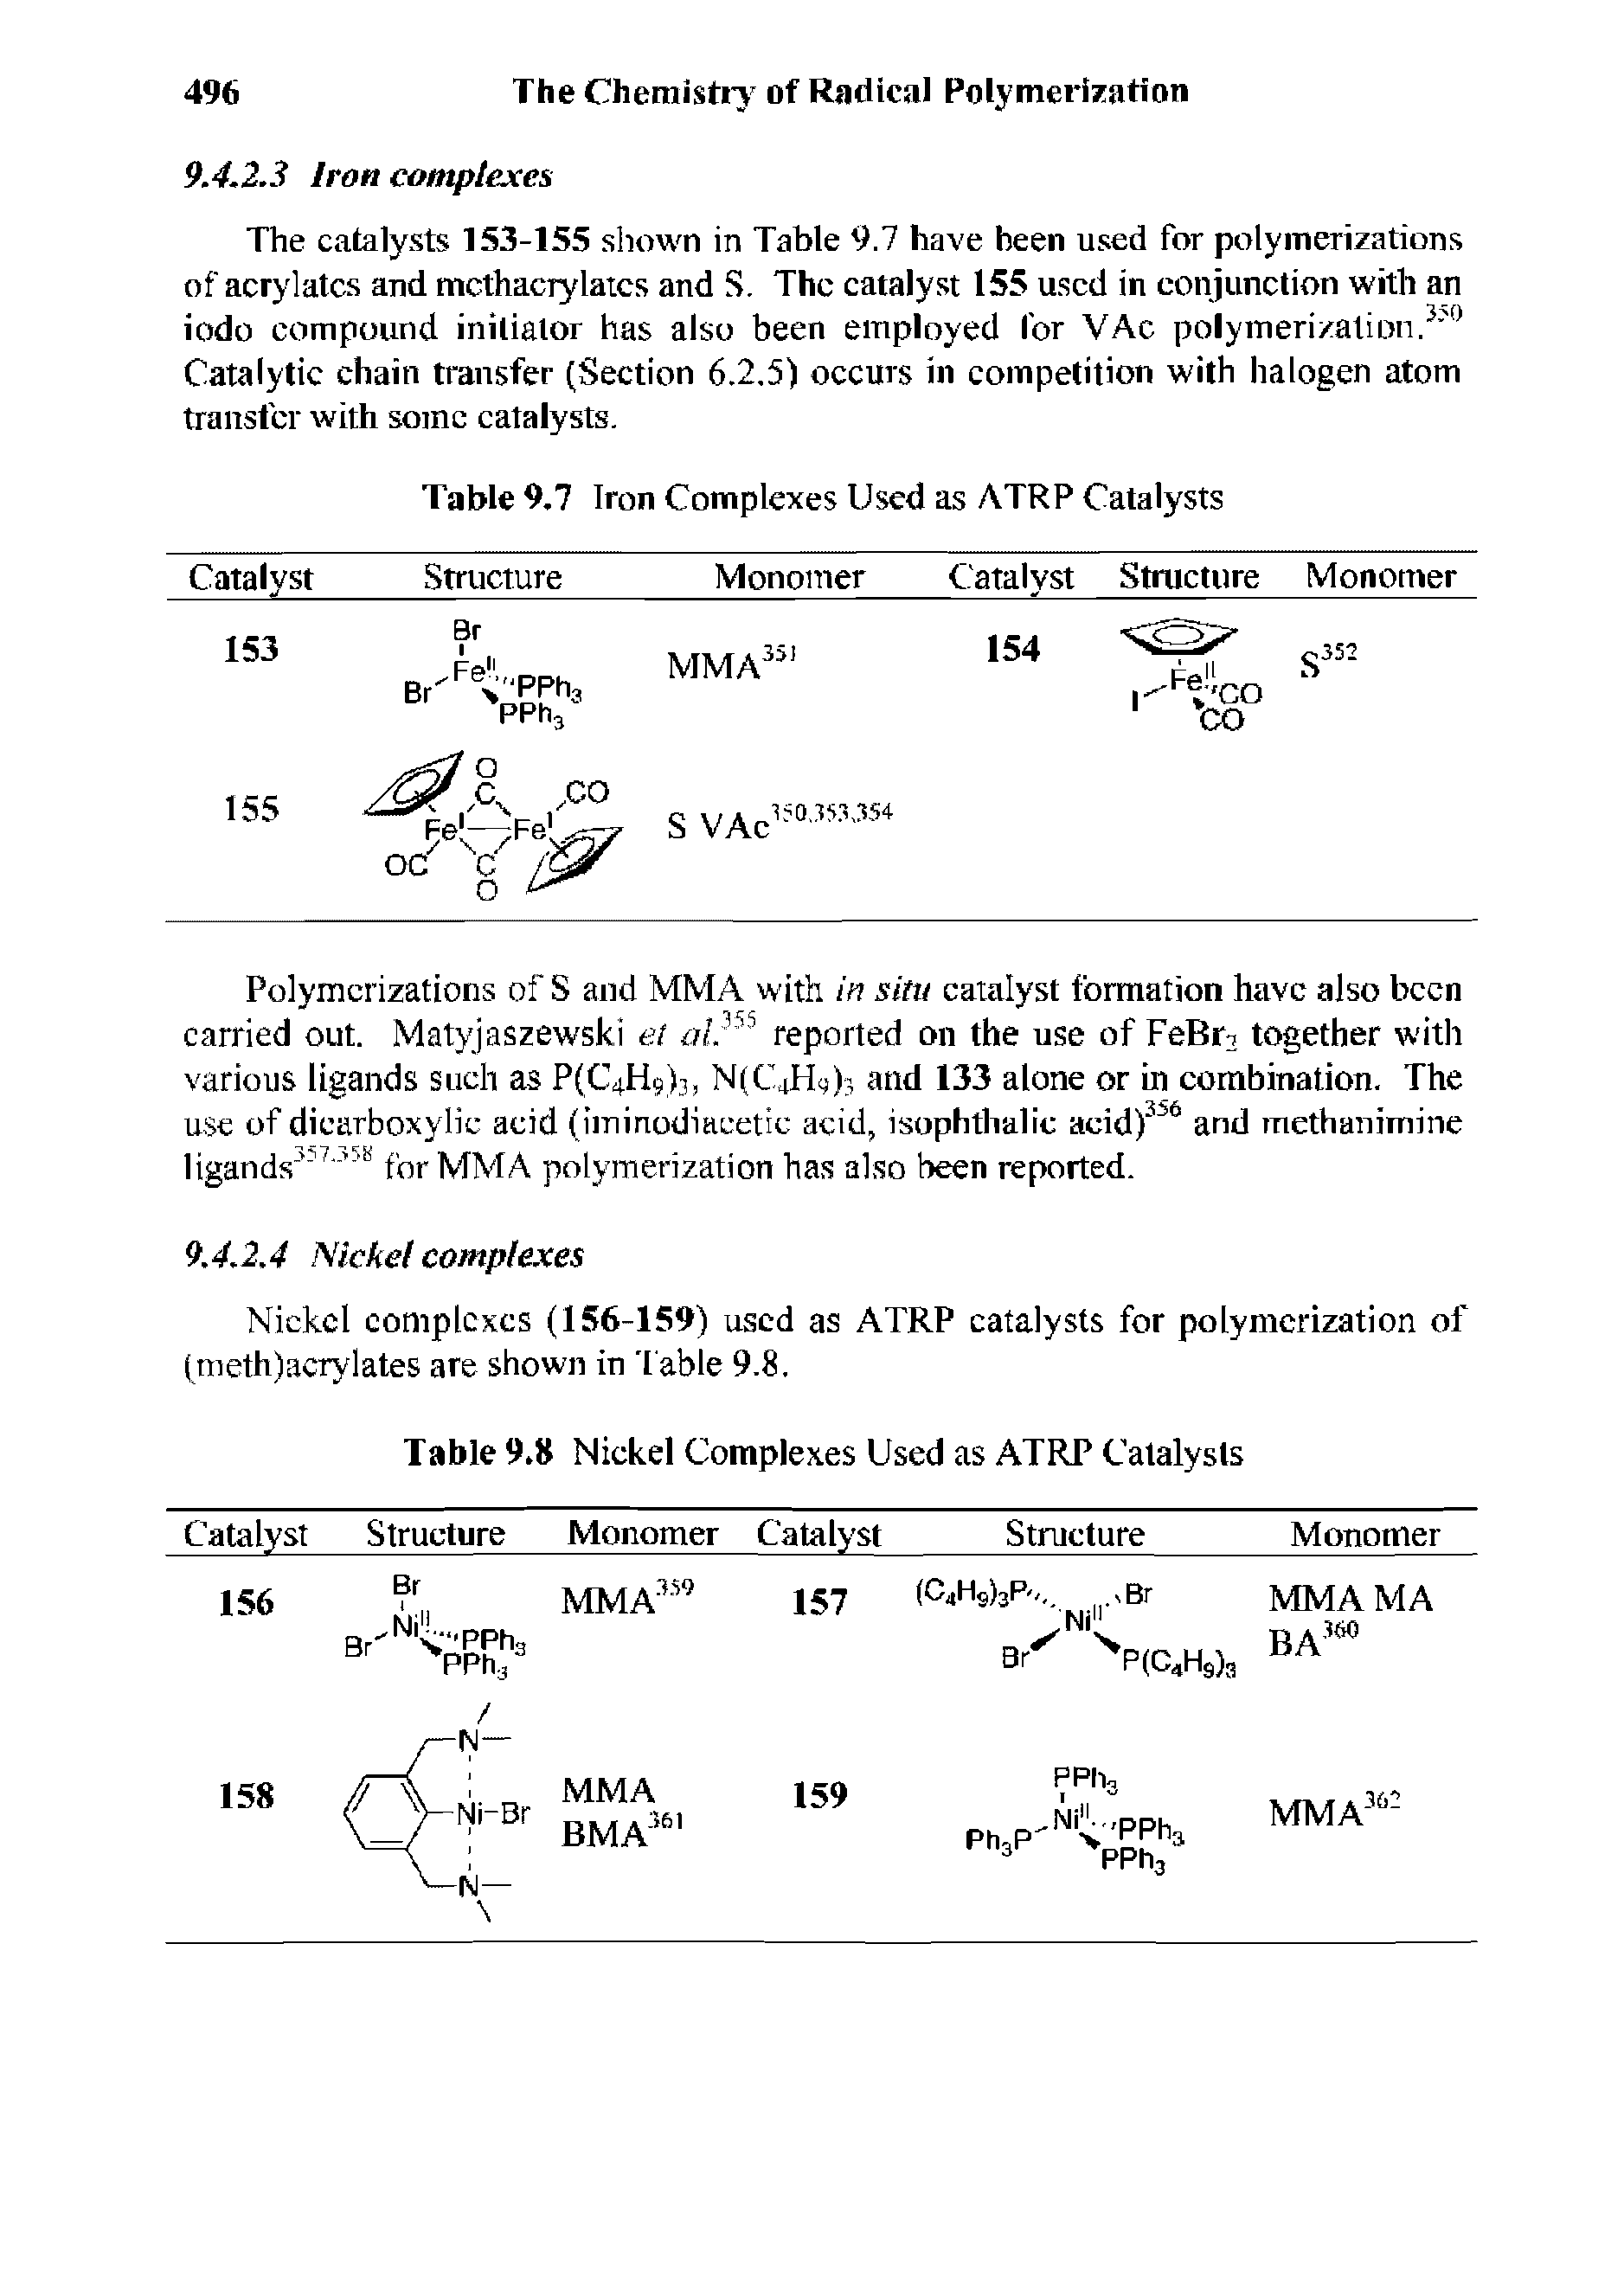 Table 9.7 Iron Complexes Used as ATRP Catalysts...